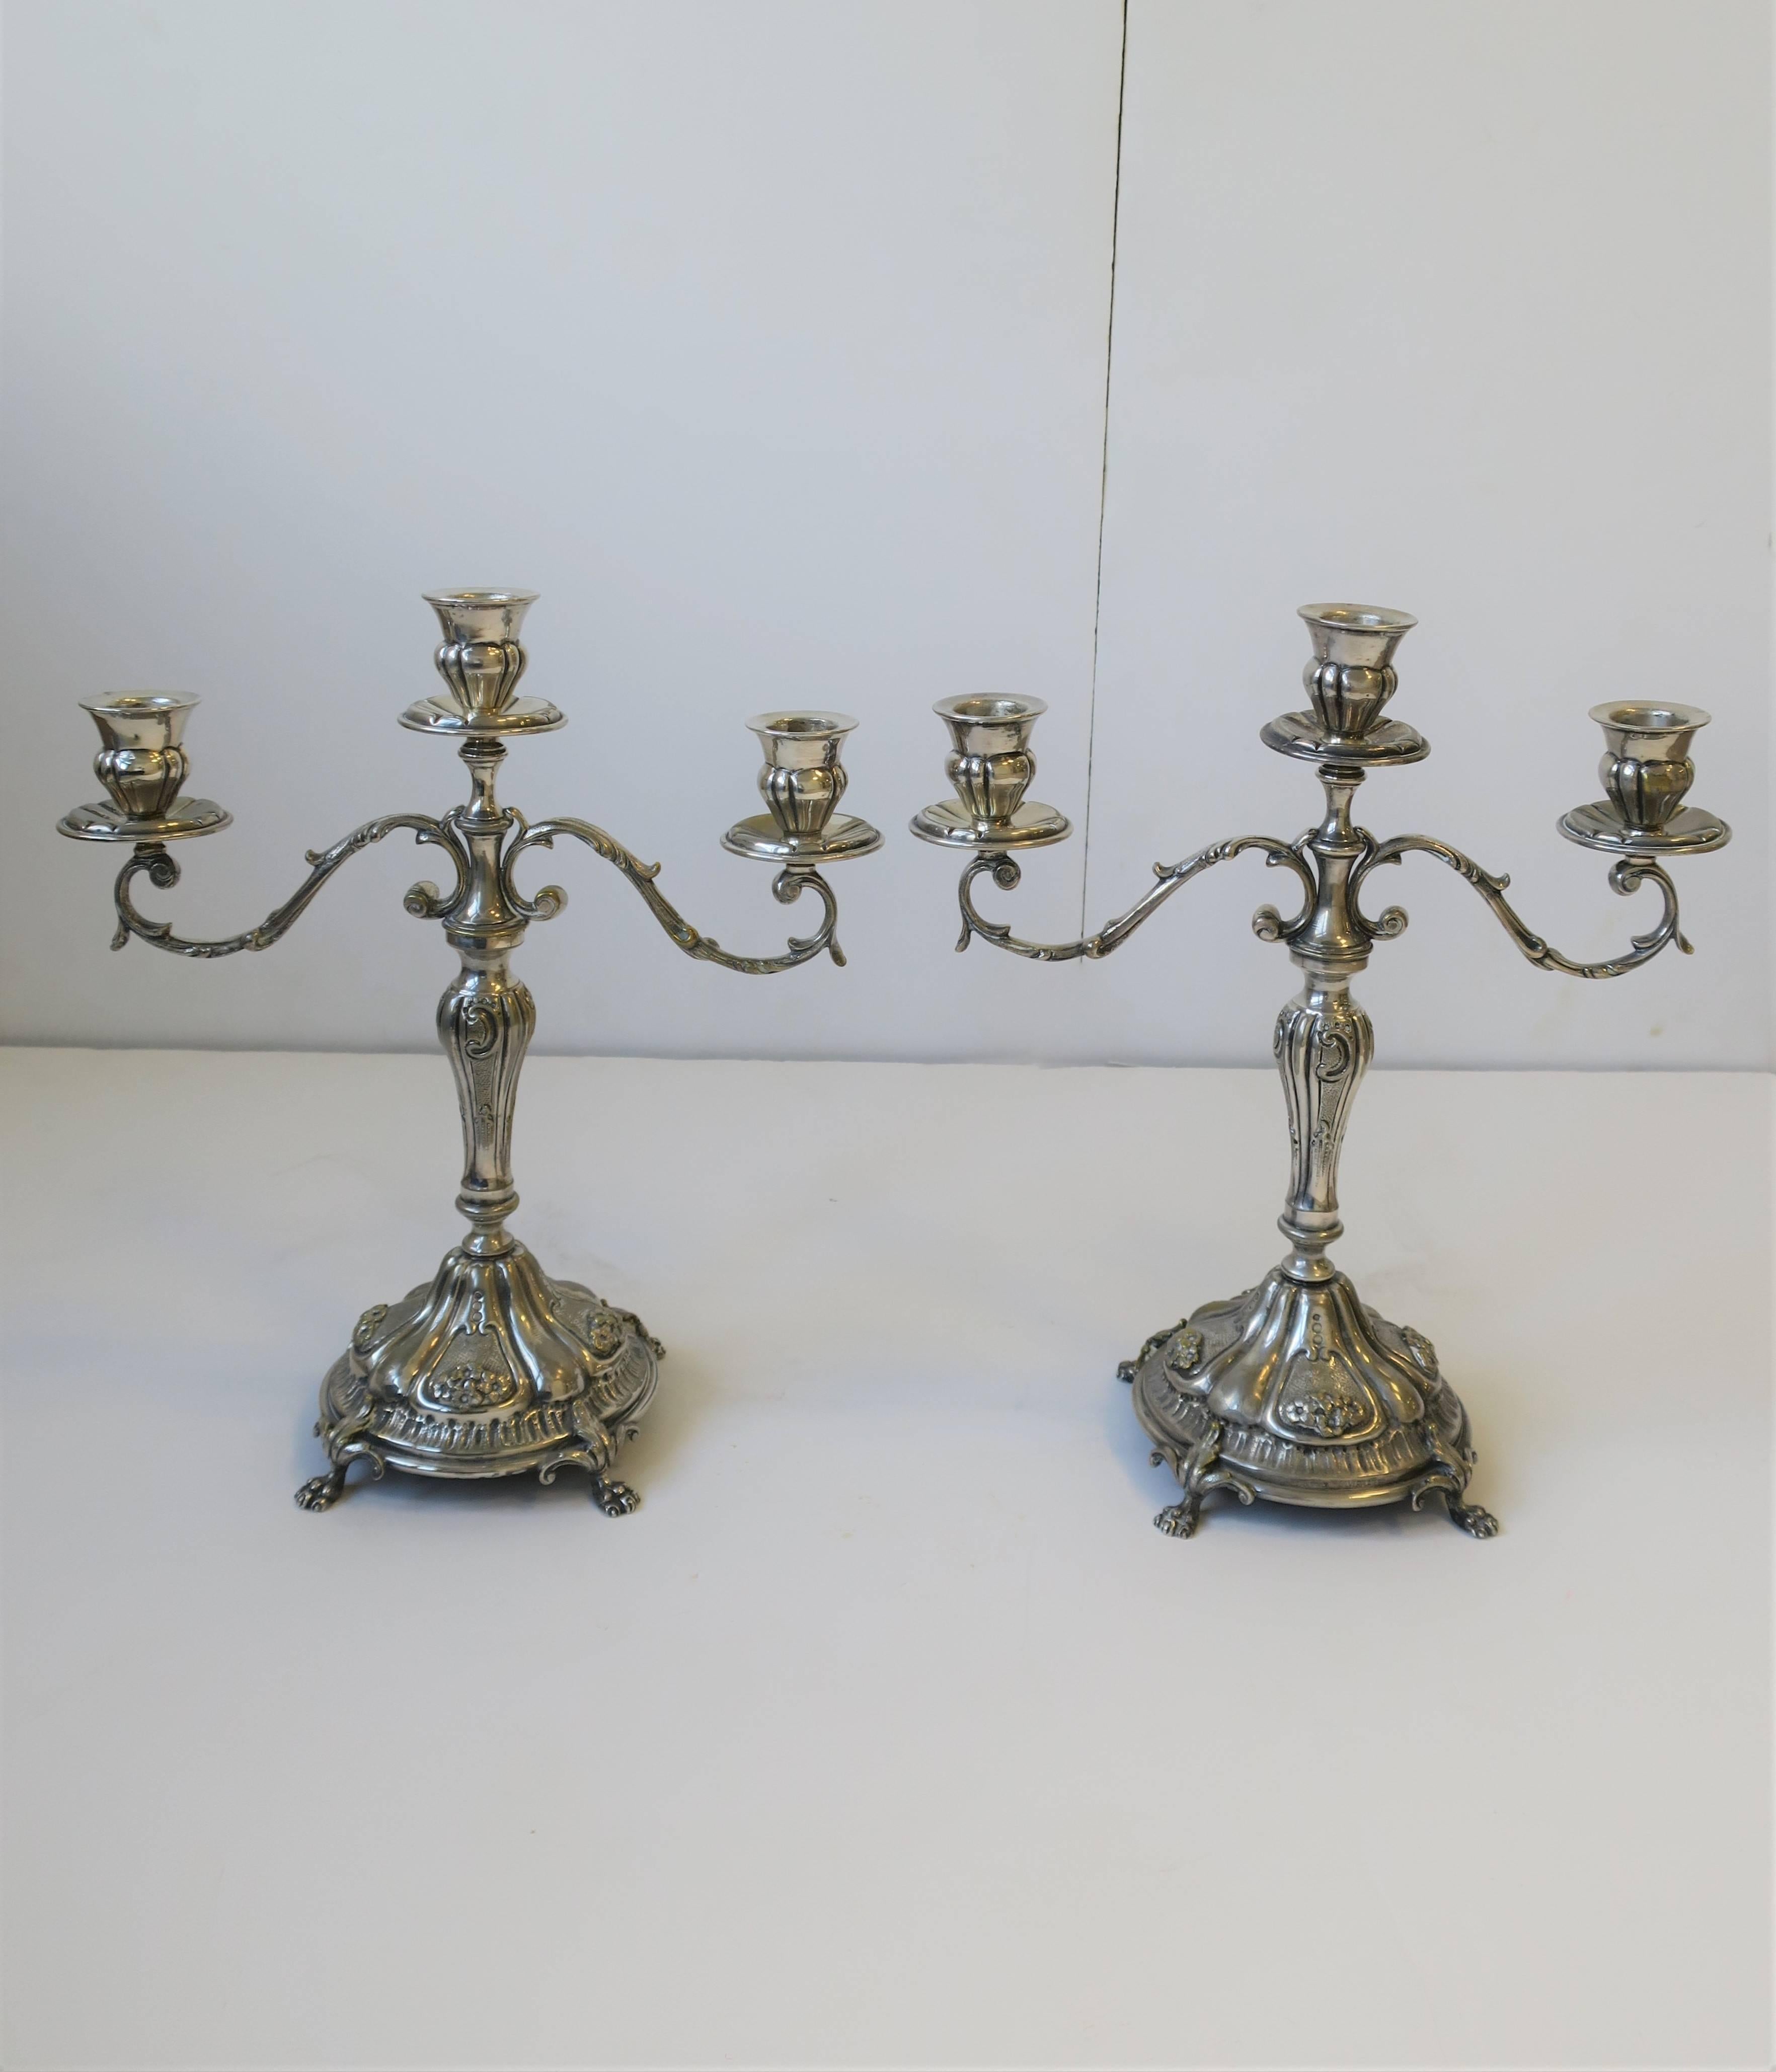 A beautiful pair of Italian sterling silver-plated candlestick holders or candelabras, Italy, circa 20th century. Candlesticks are in the Regency style with beautiful details and paw feet. Pair are marked 